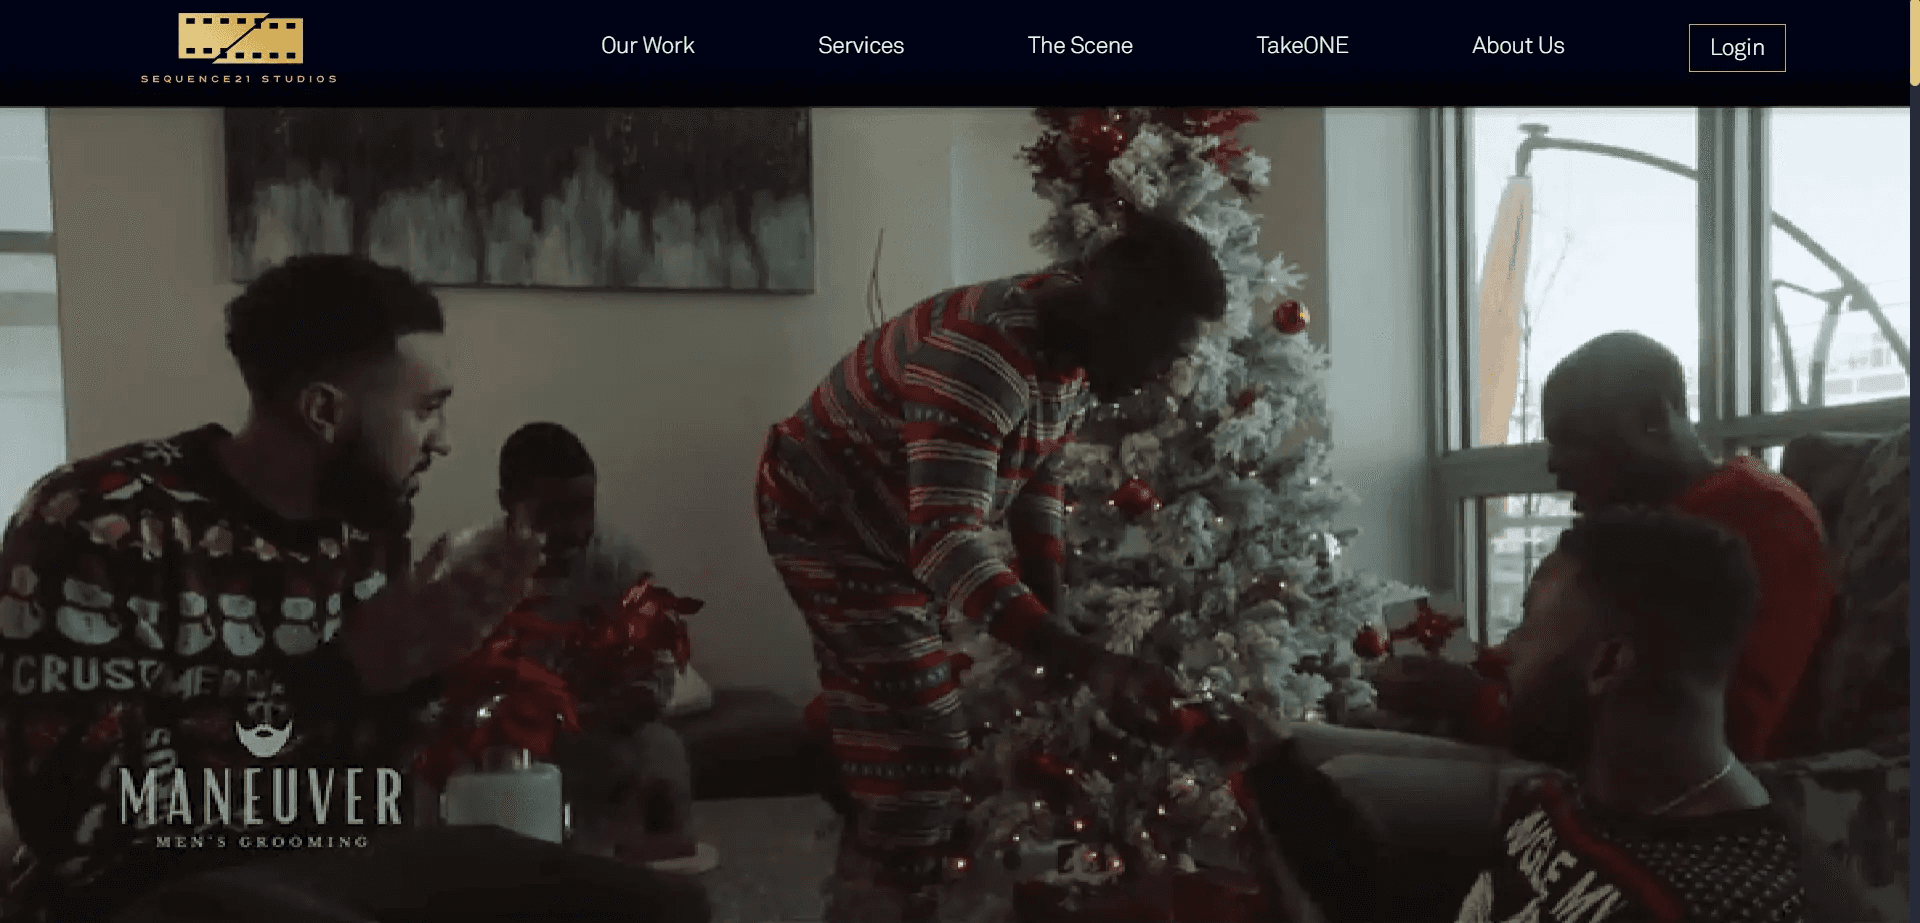 In a clip from the website's intro video, a group of men are celebrating Christmas in an advertisement produced by Sequence21